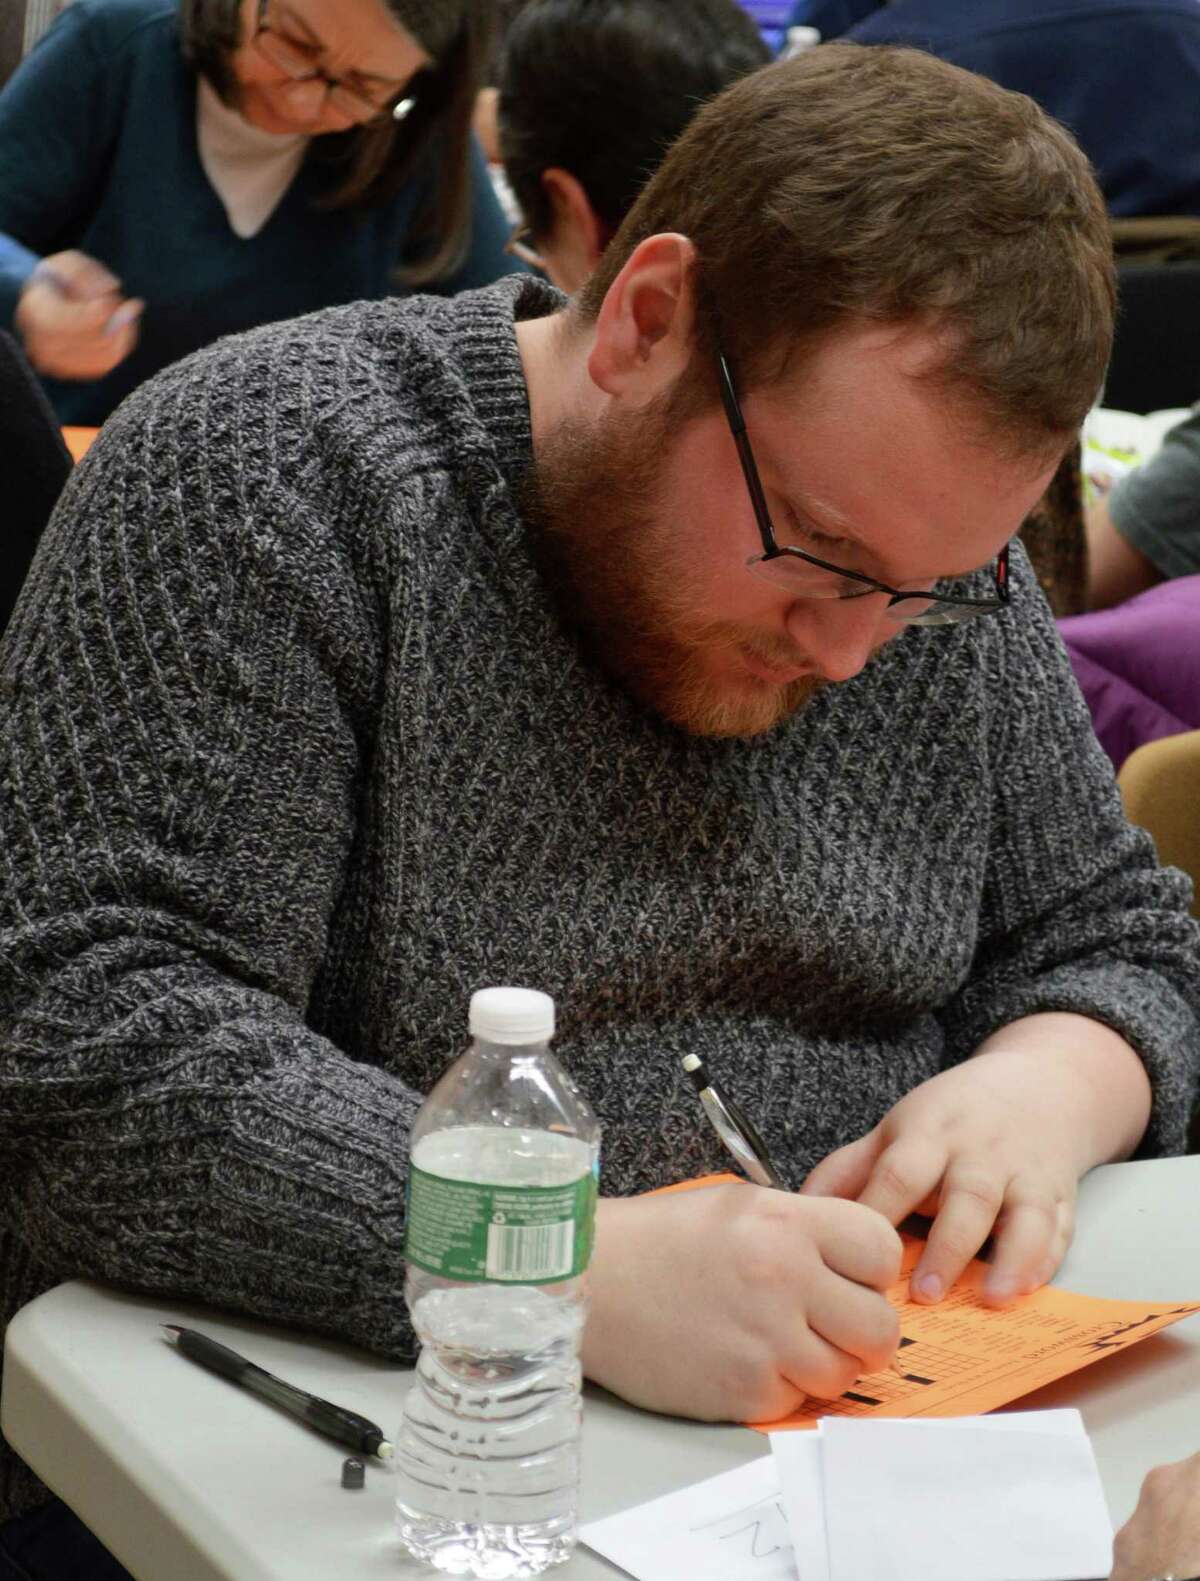 Andy Kravis of Brooklyn, N.Y., took the championship Saturday at the Westport Library's Crosswords Contest for the second year in row.